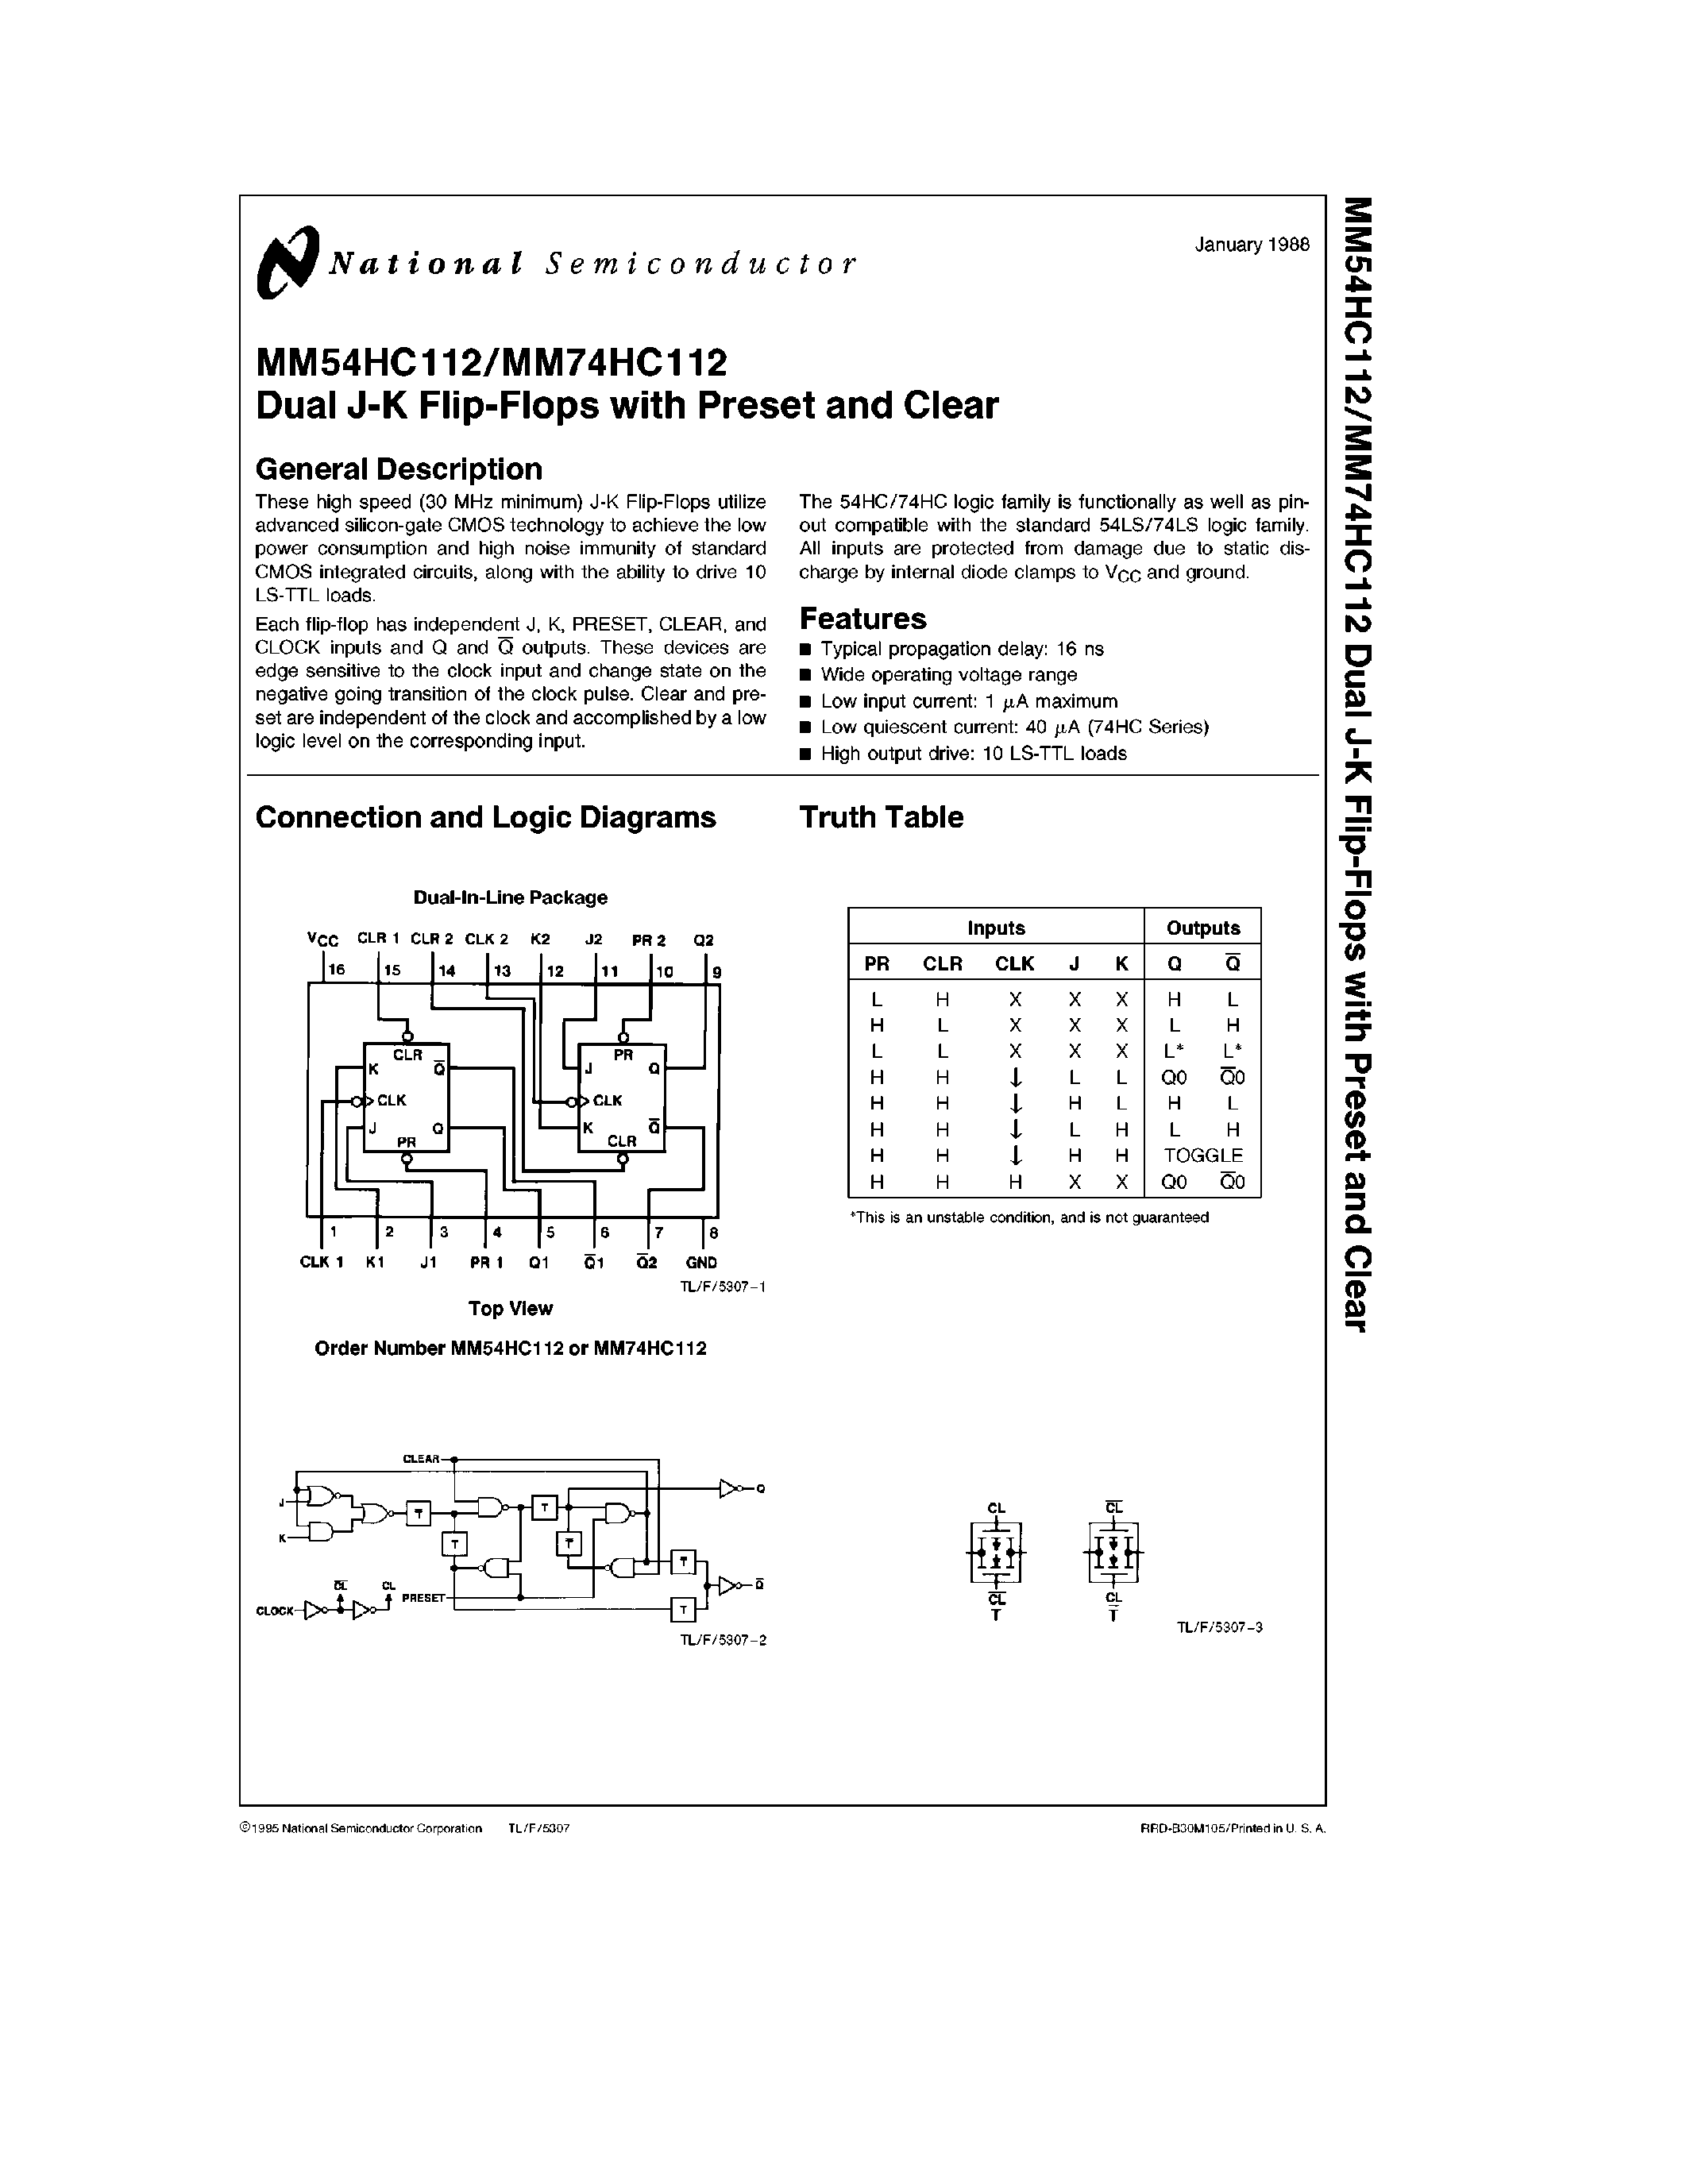 Datasheet MM74HC112J - Dual J-K F-F with Preset and Clear page 1